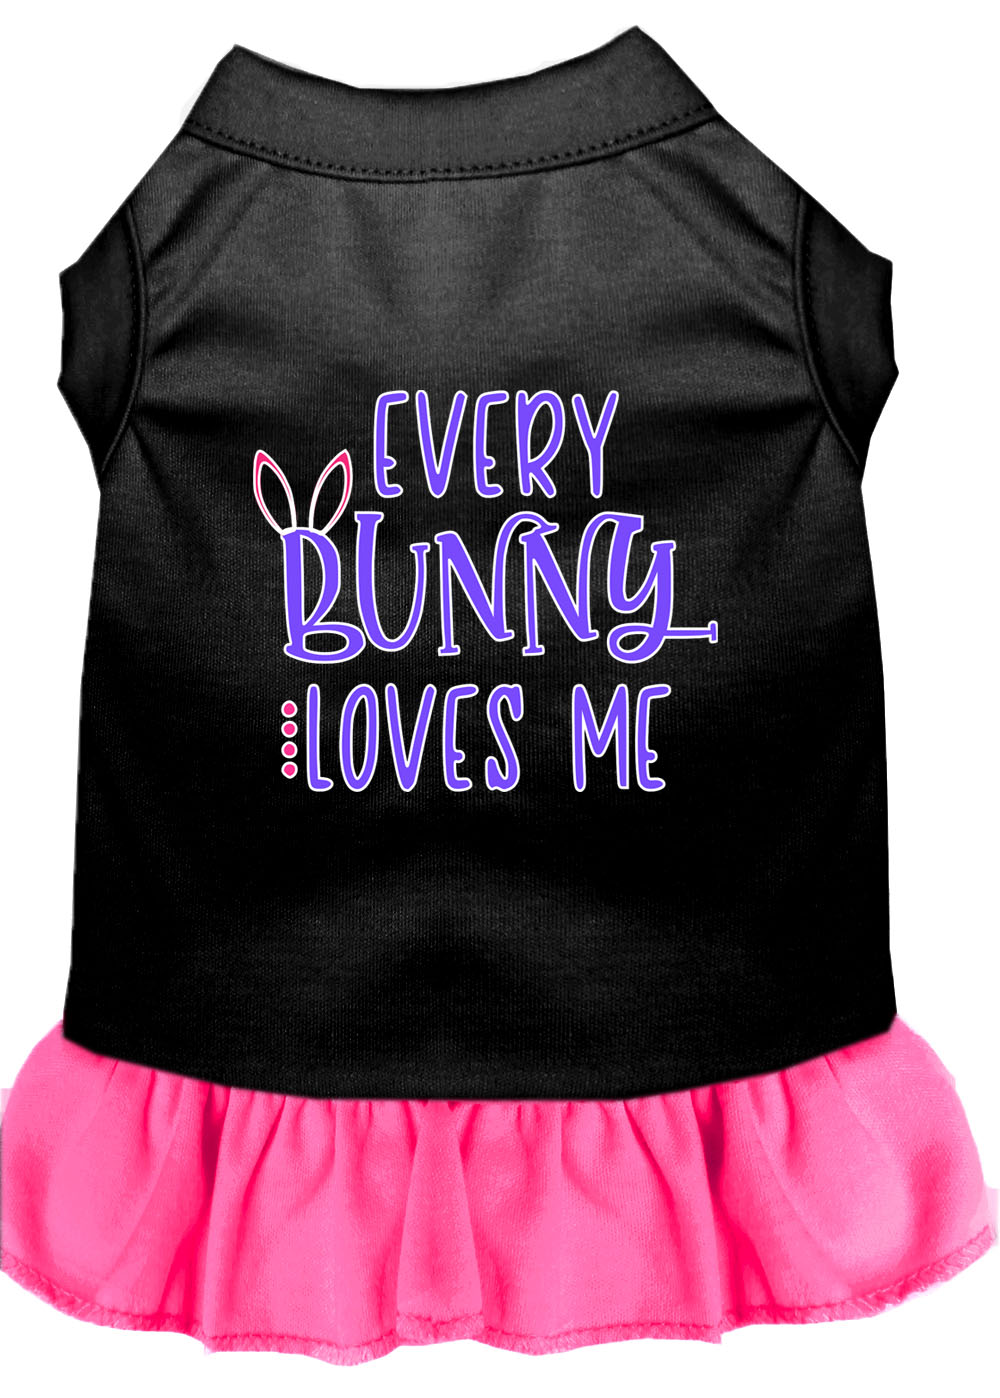 Every Bunny Loves me Screen Print Dog Dress Black with Bright Pink XXXL